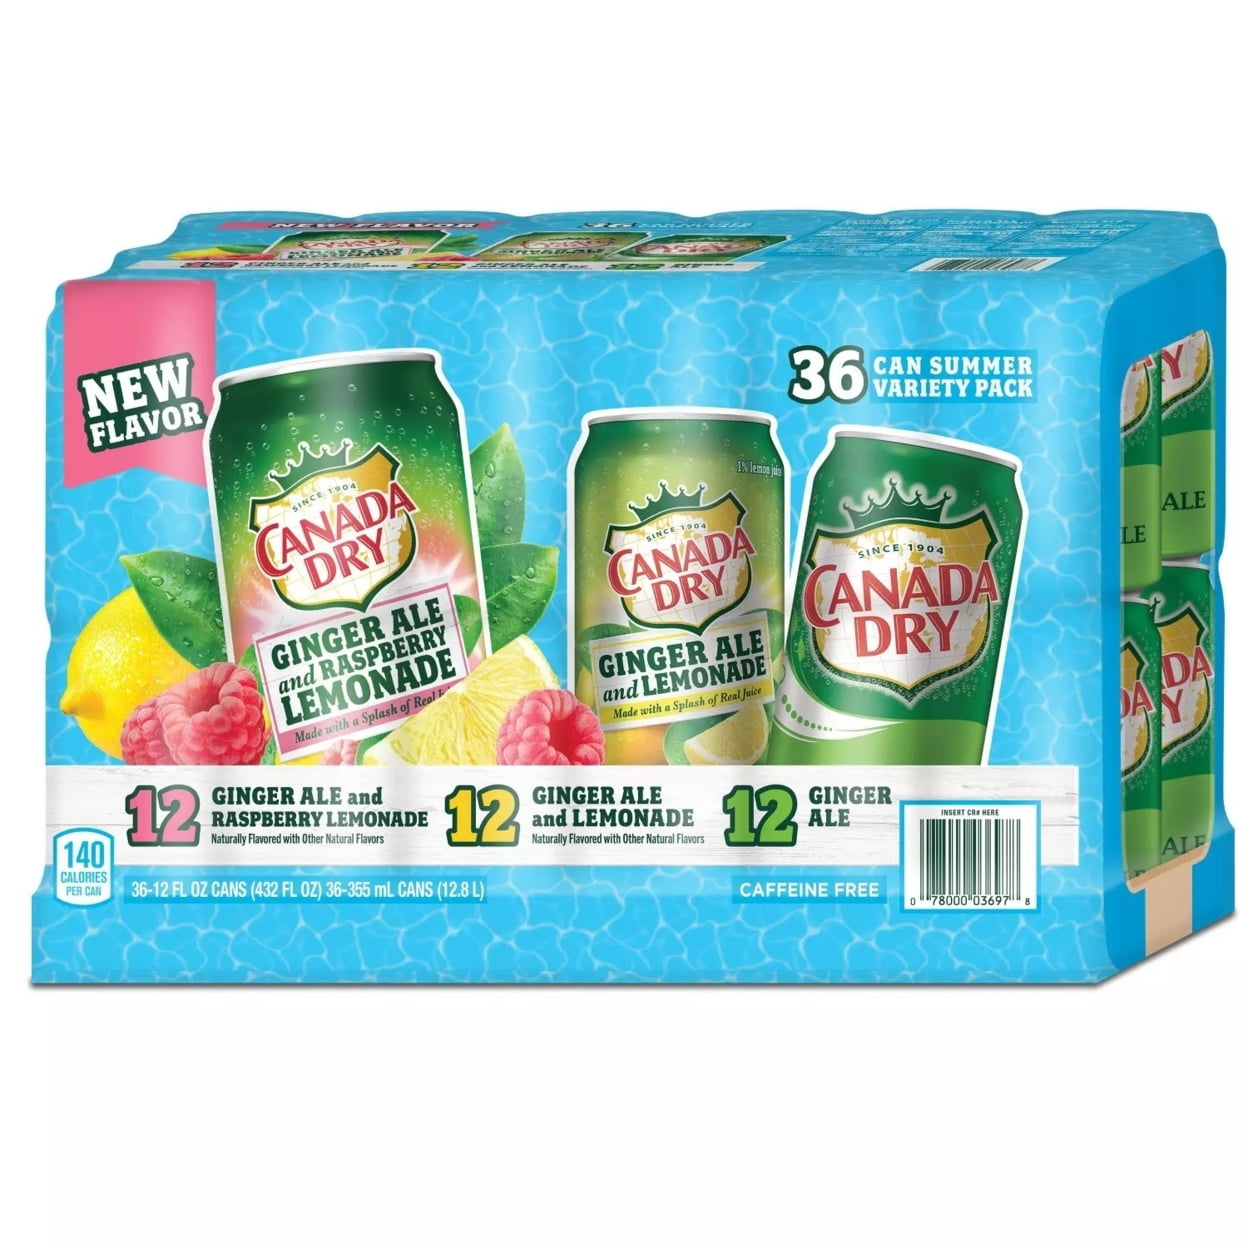 Canada Dry Ginger Ale Summer Variety Pack, 12 Fluid Ounce (36 Pack)